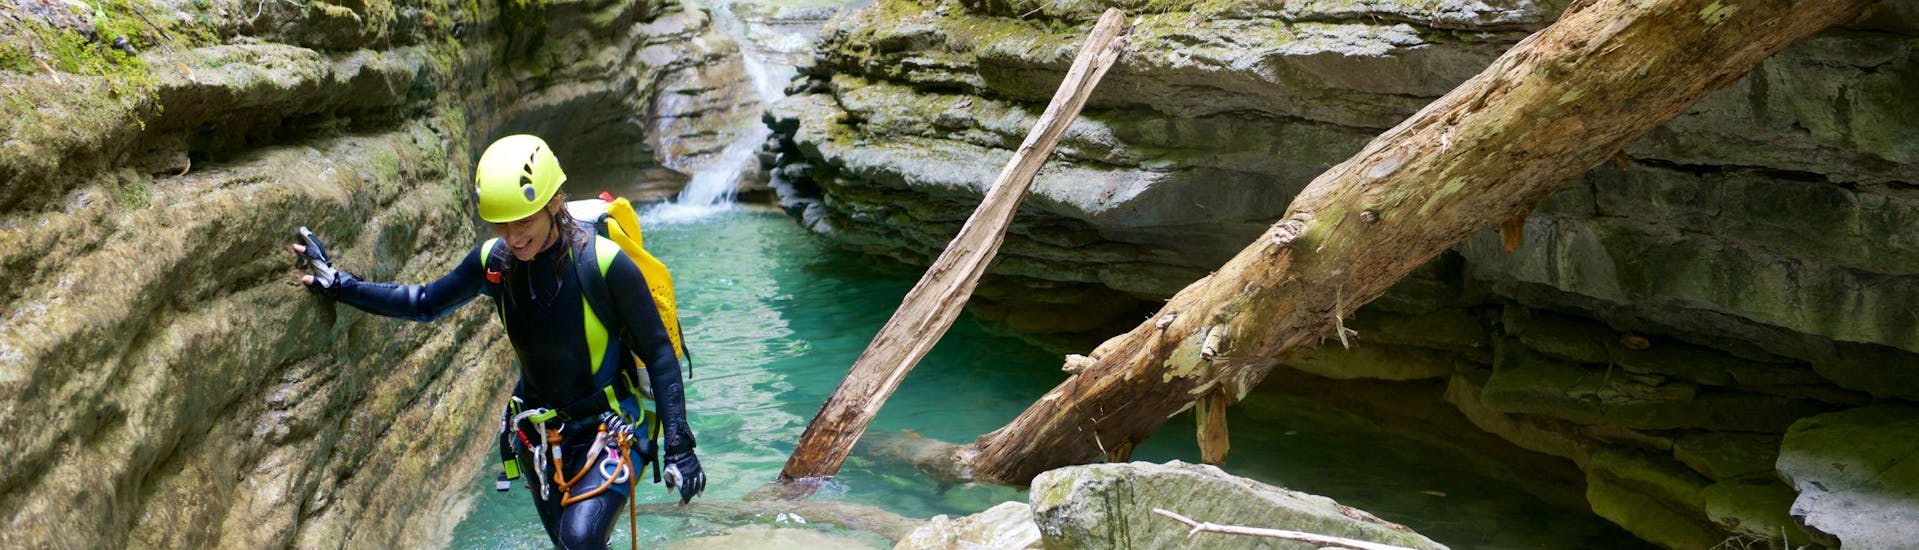 A female canyoneer is wading through a natural pool of water while canyoning near Queenstown.